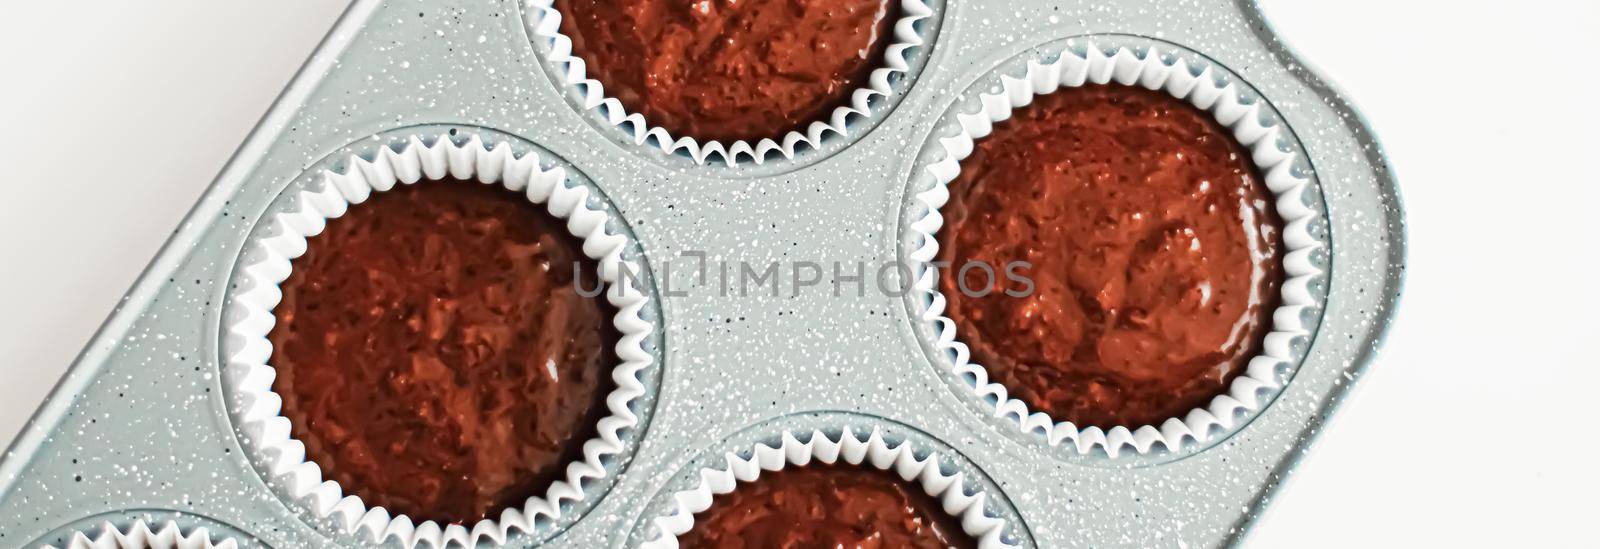 Chocolate muffin or cupcake batter in a pan ready to bake, homemade comfort food recipe concept